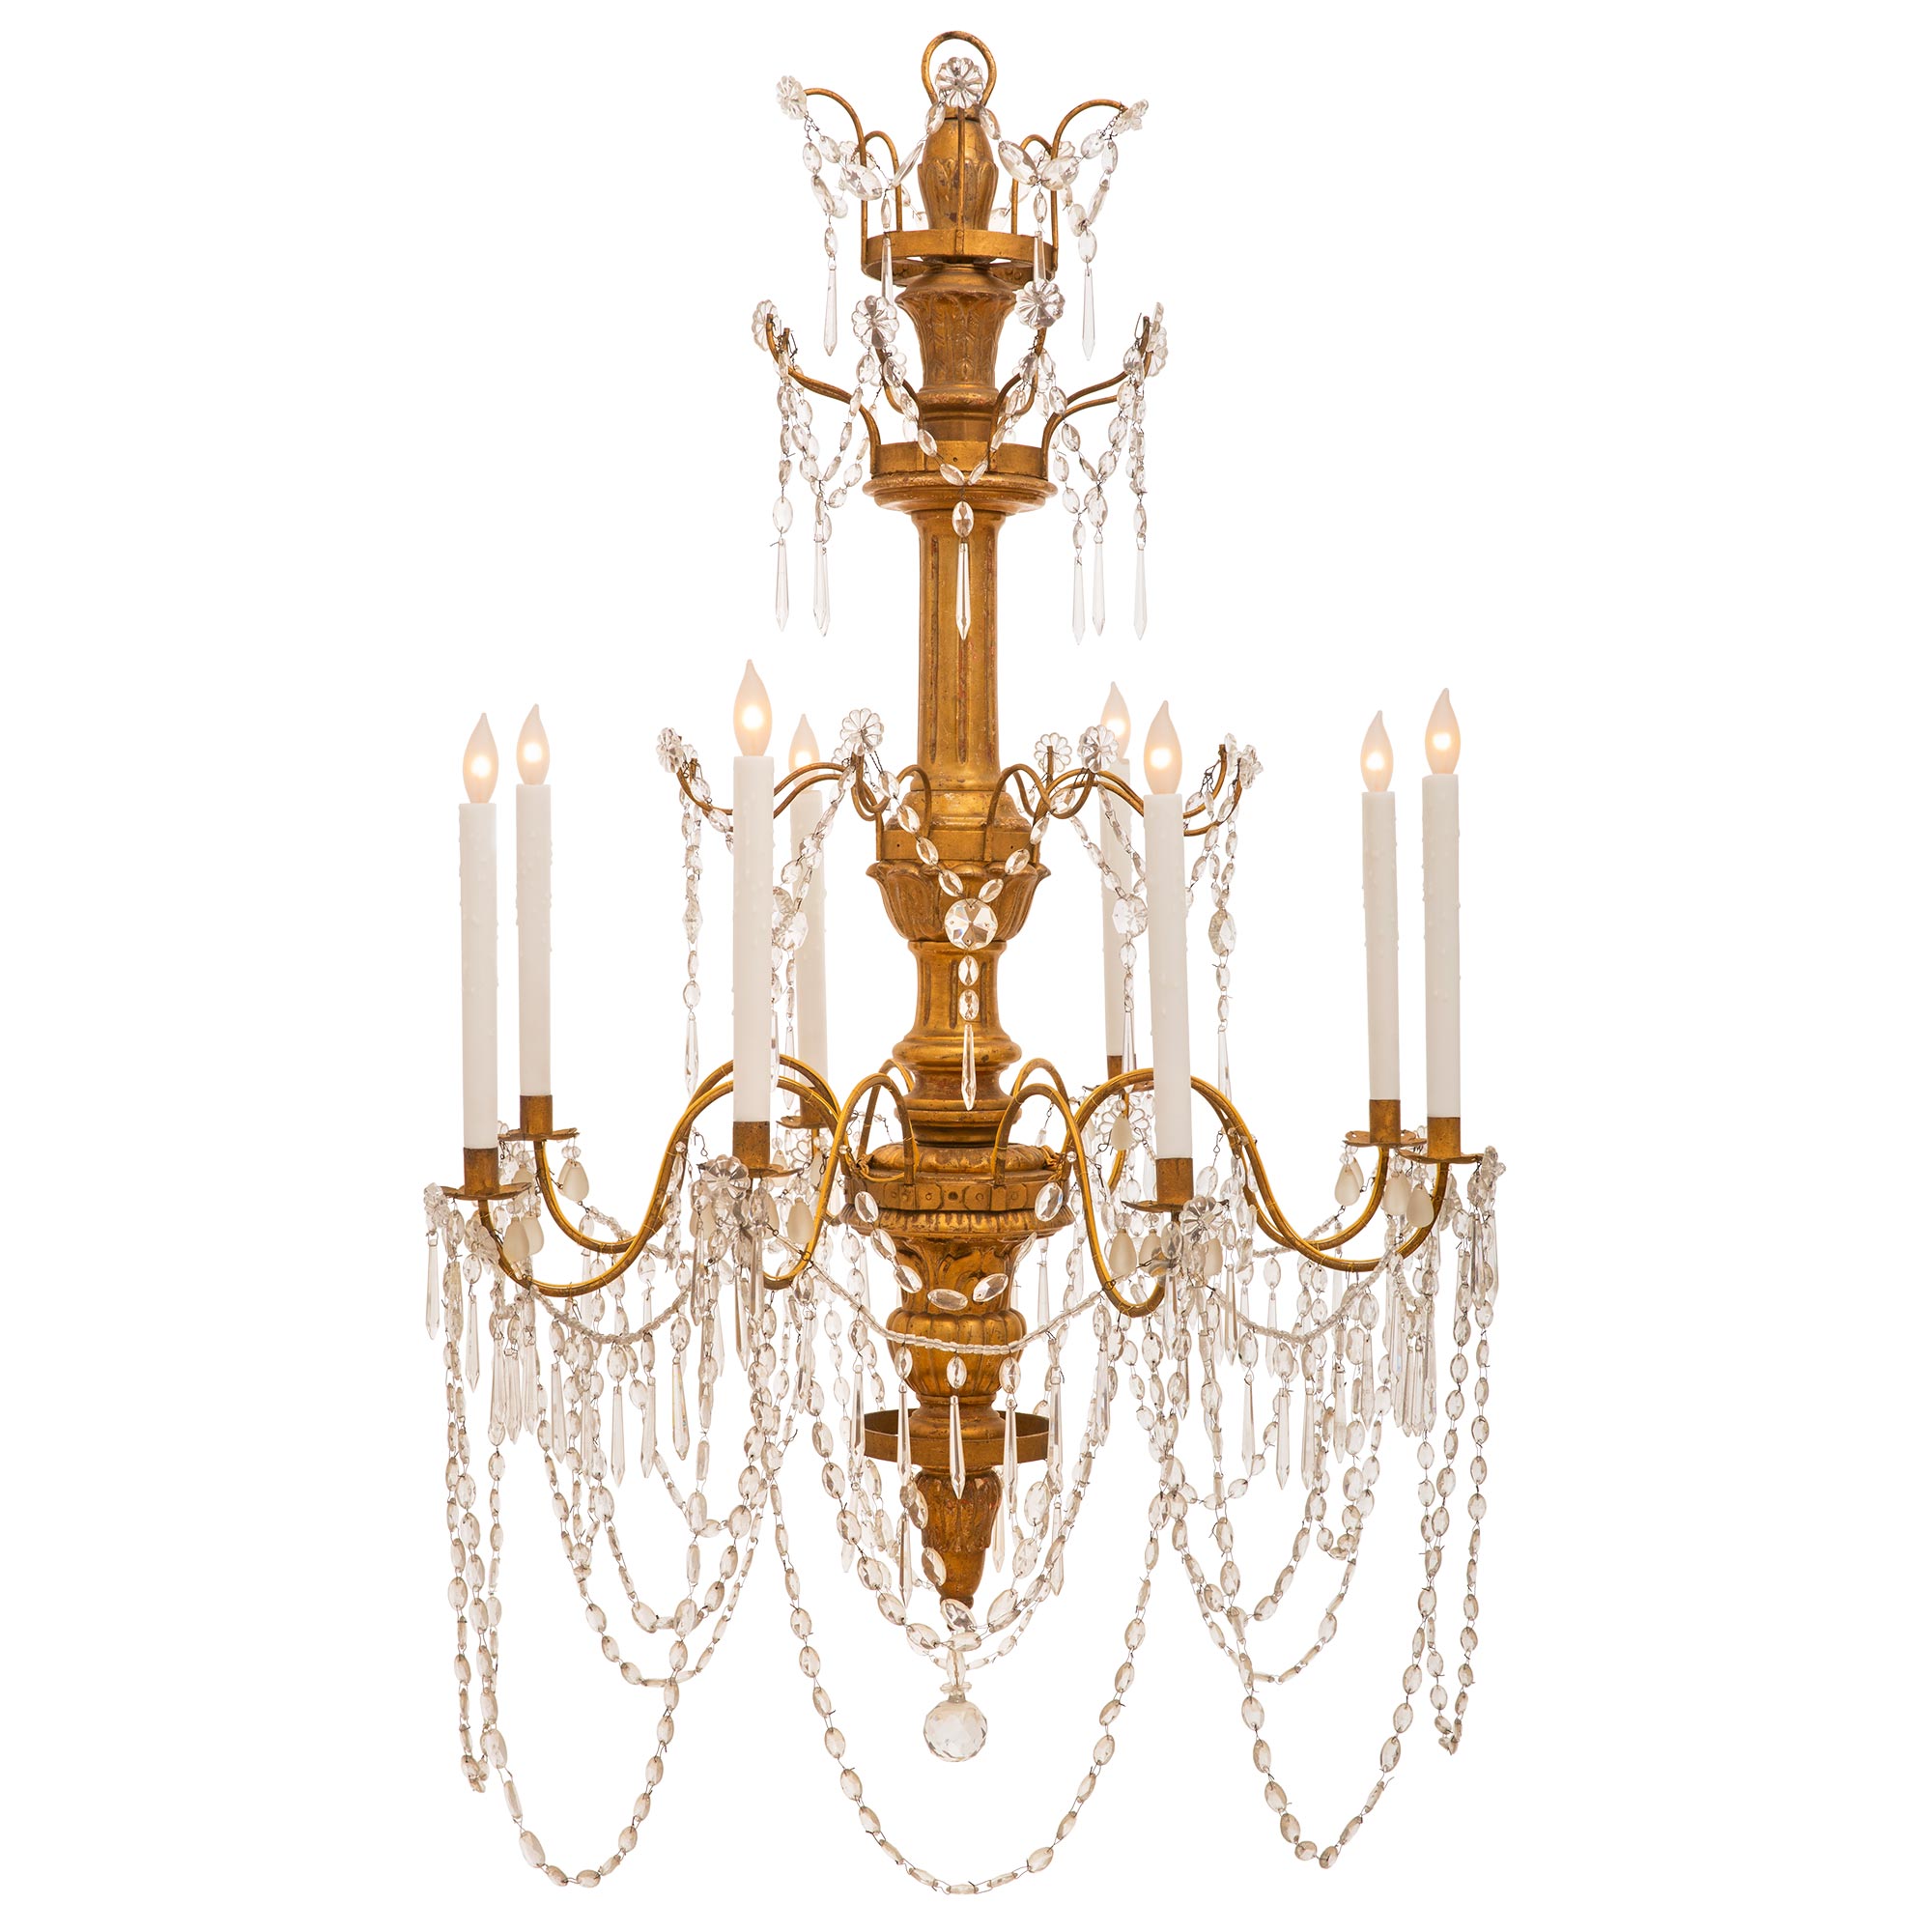 Italian Early 19th Century Giltwood and Crystal Chandelier